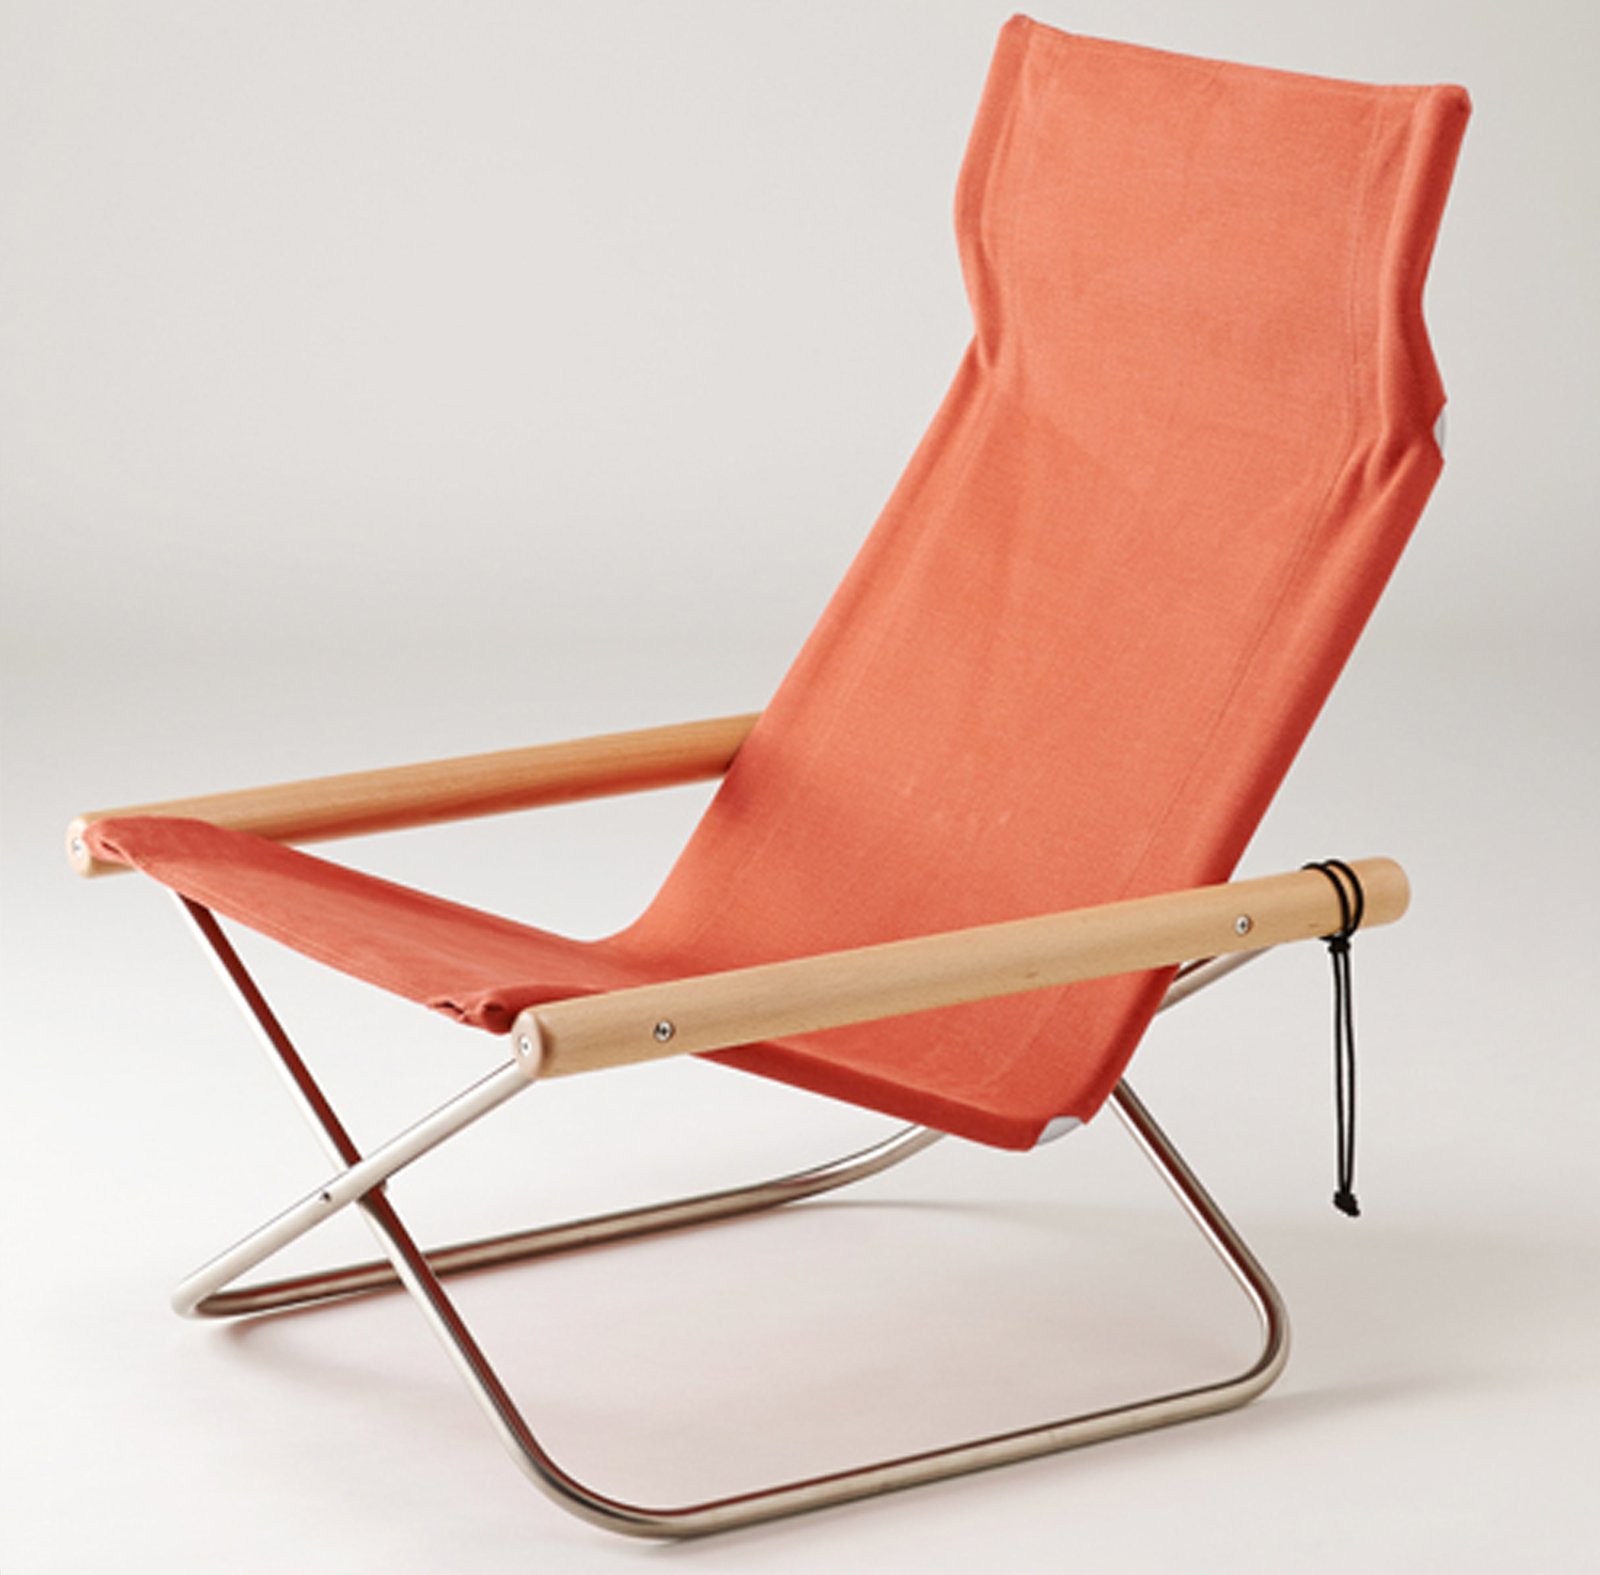 NY Folding Chair X Lounge - Takeshi Nii Nychair X - Natural